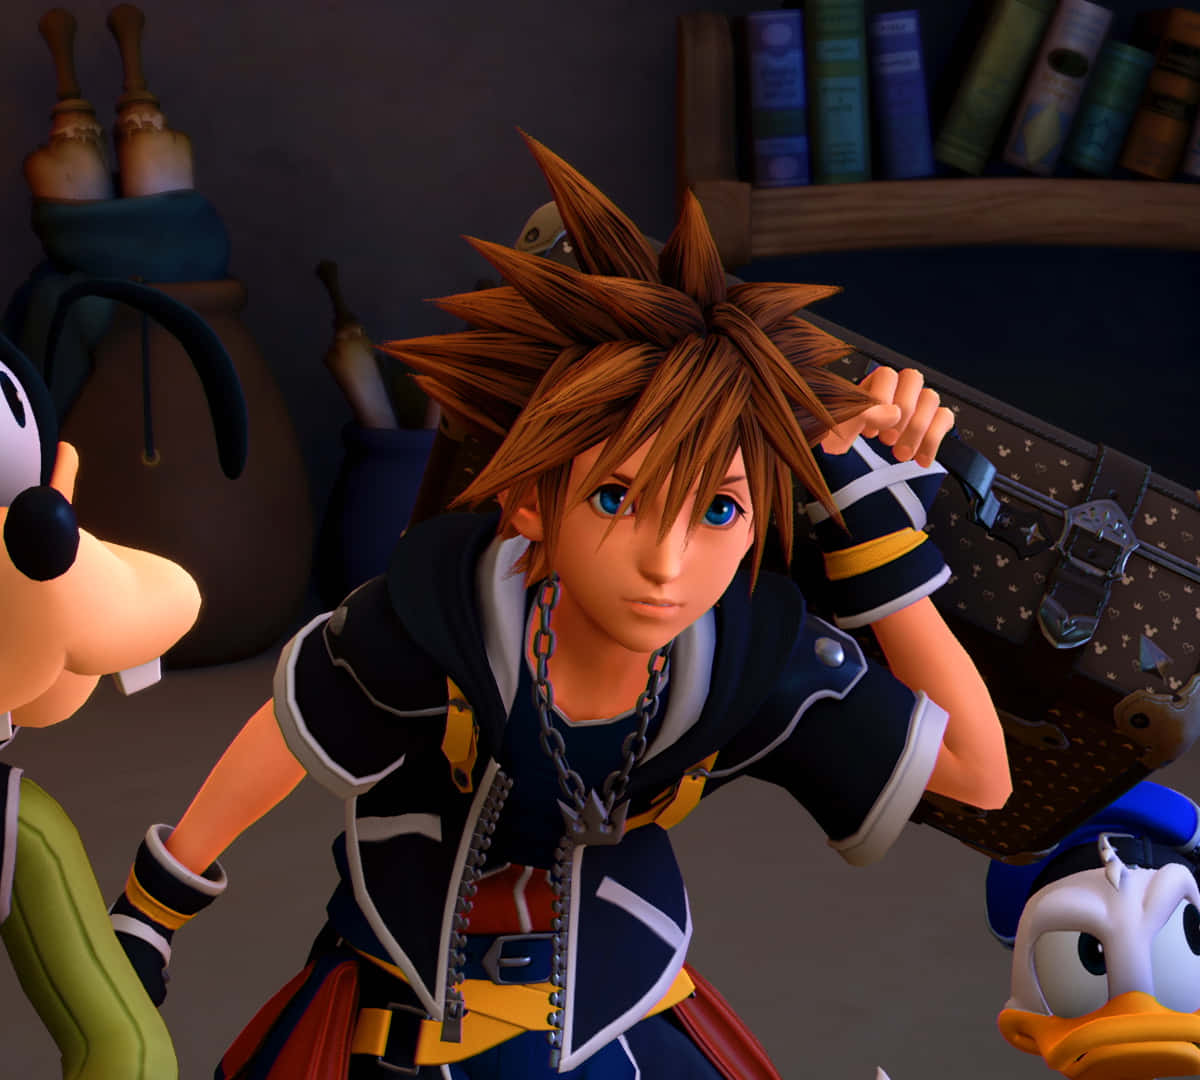 Sora and Goofy join forces to take on the darkness